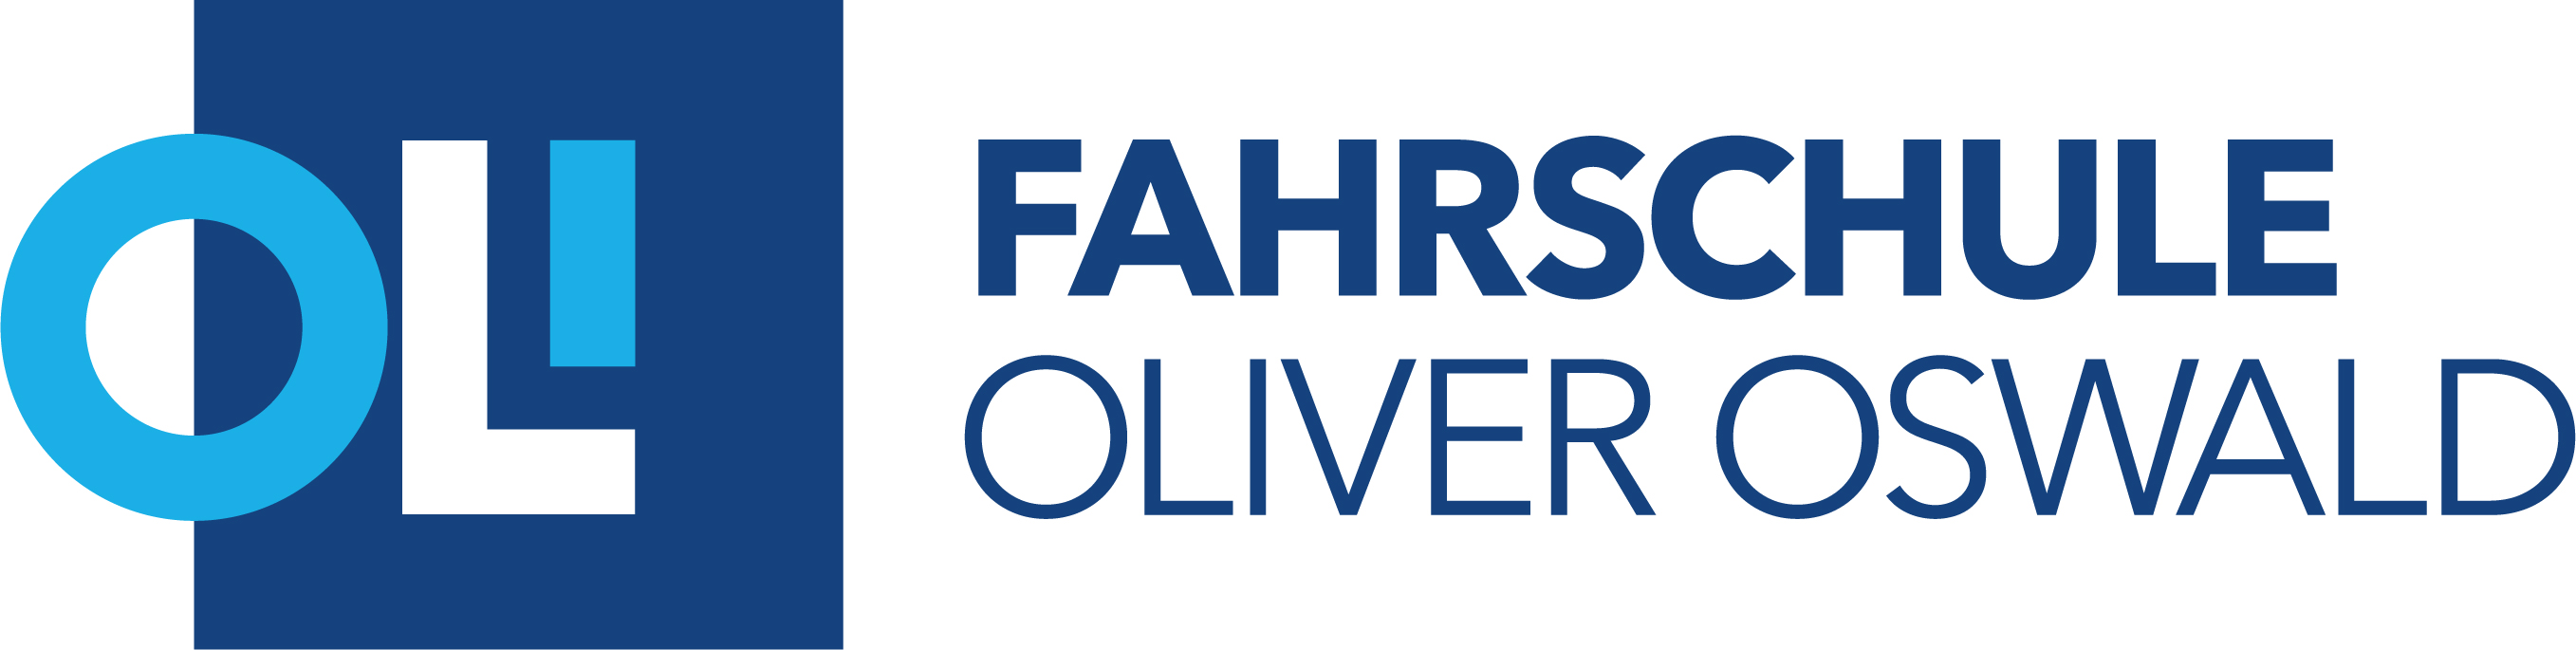 Fahrschule Oliver Oswald GmbH